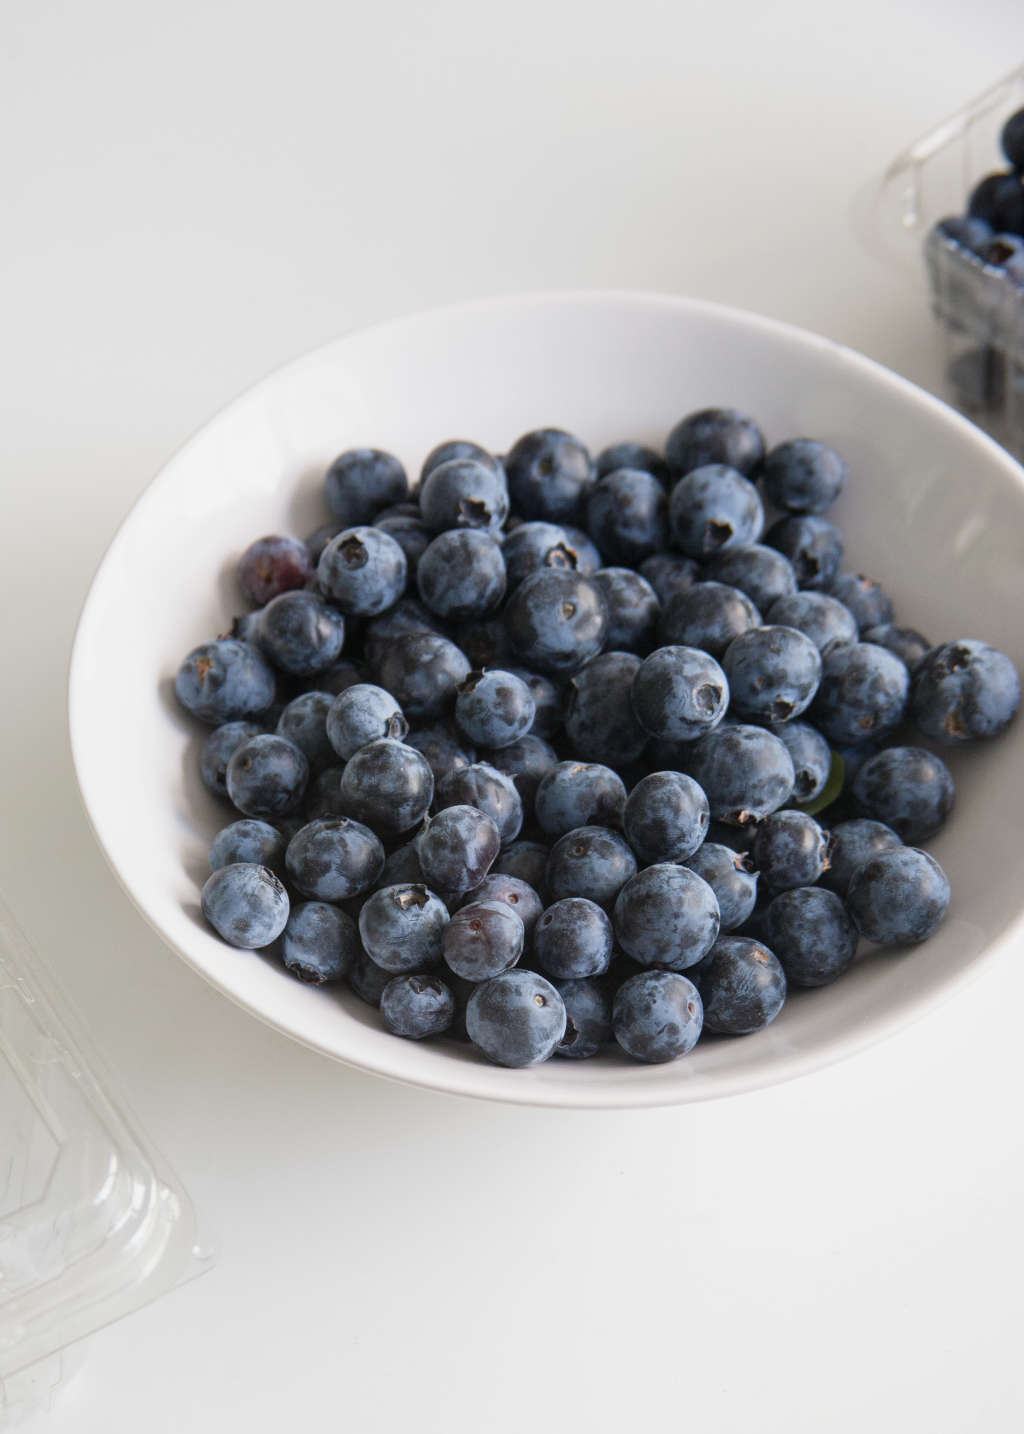 Here's What 1 Pound of Blueberries Looks Like | Kitchn